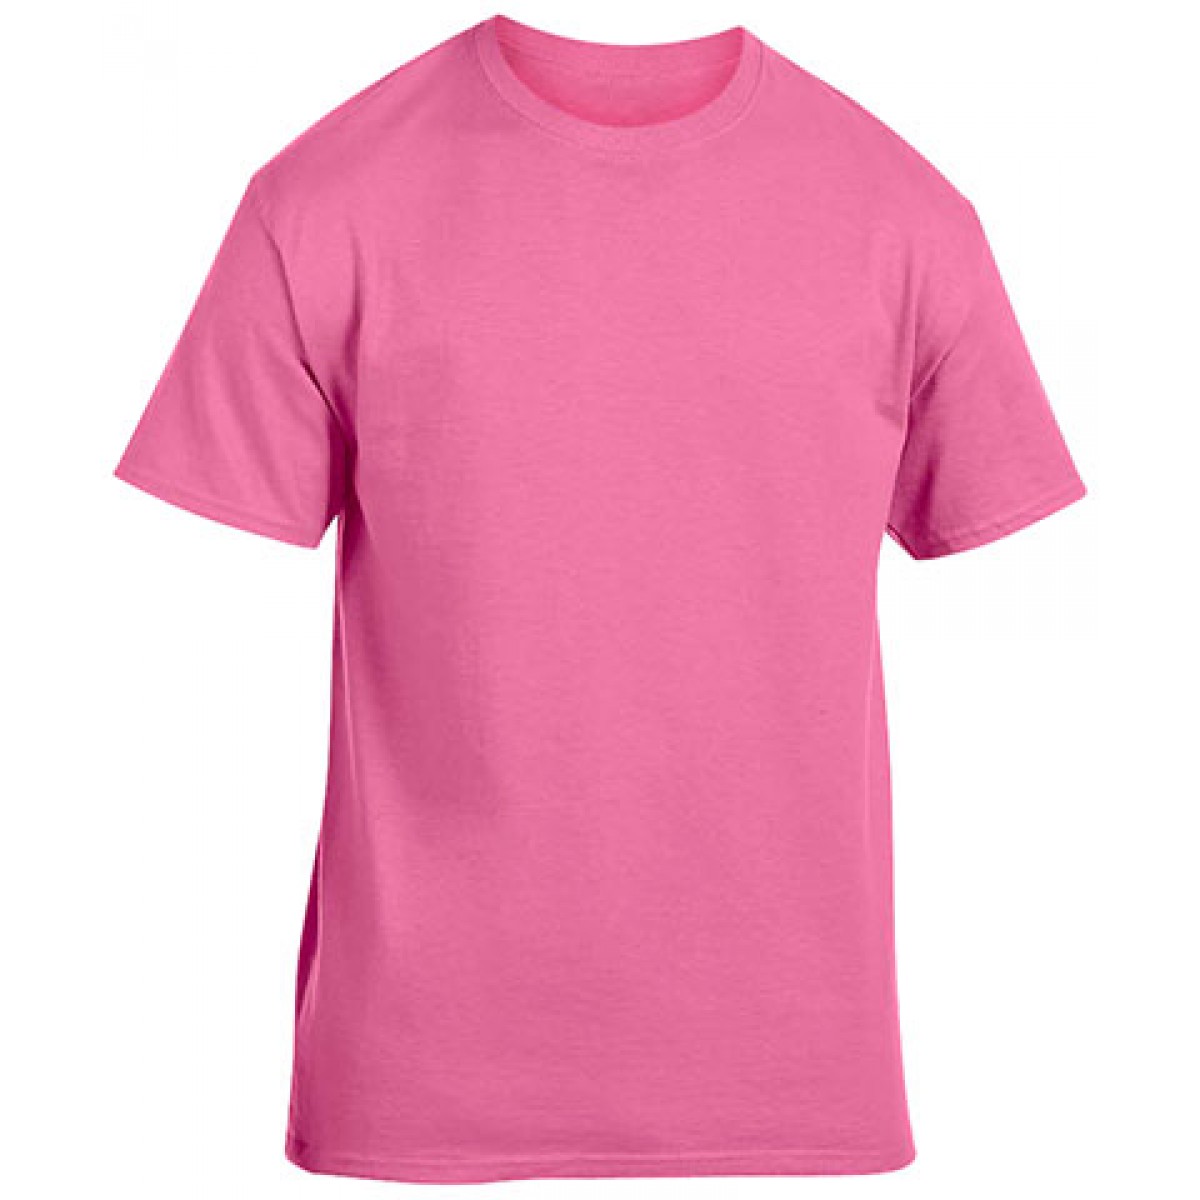 Heavy Cotton Activewear T-Shirt-Safety Pink-3XL